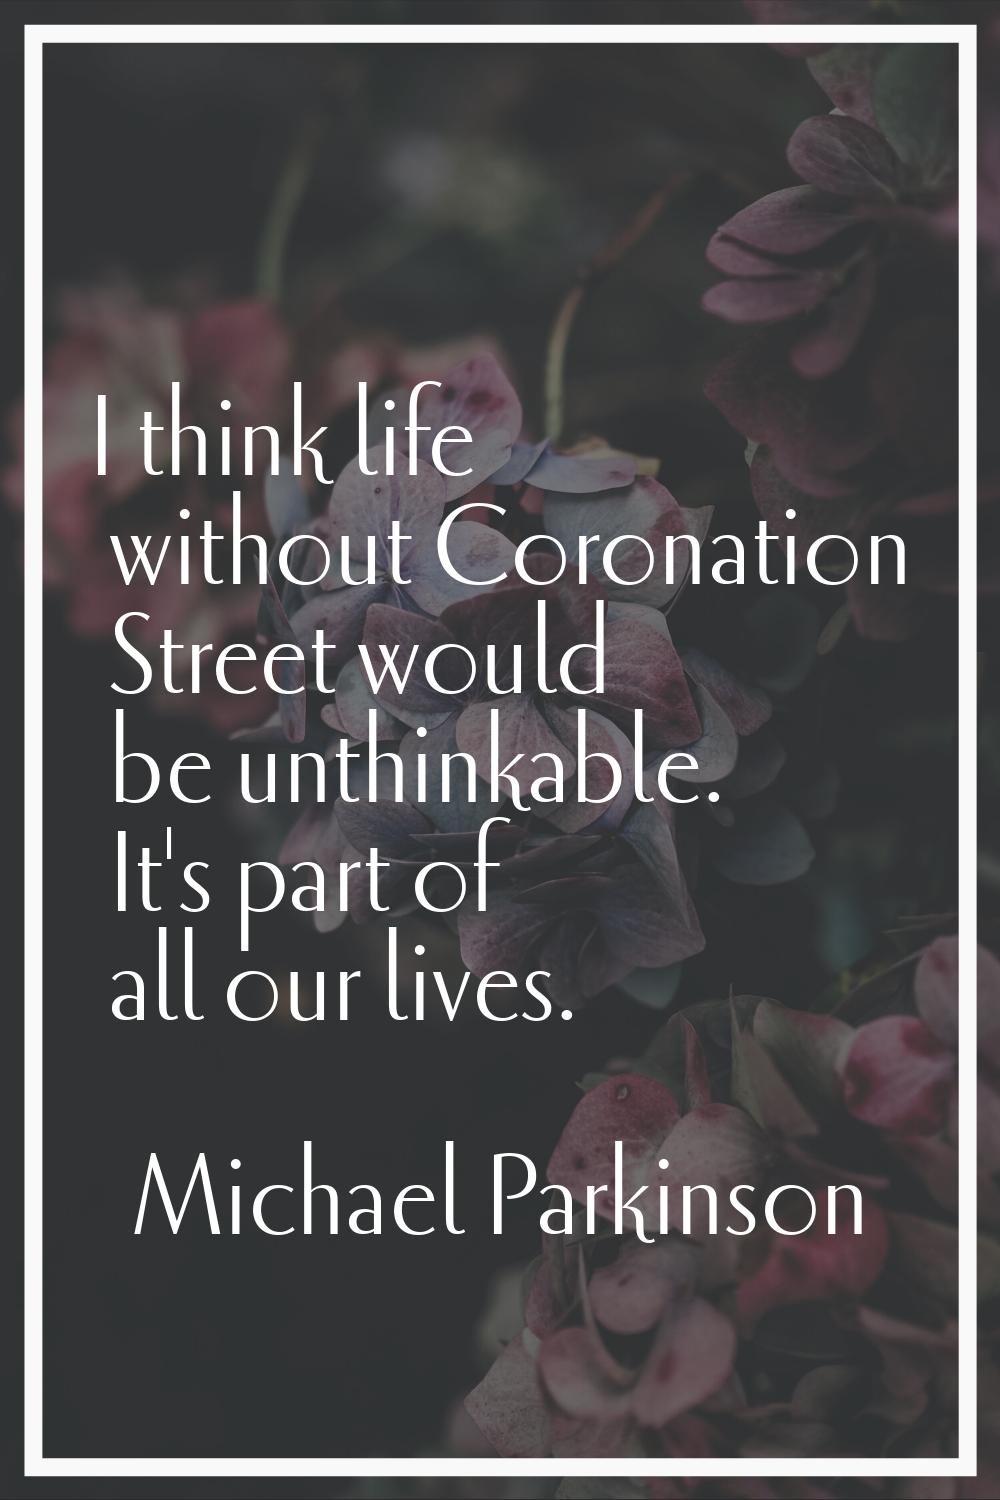 I think life without Coronation Street would be unthinkable. It's part of all our lives.